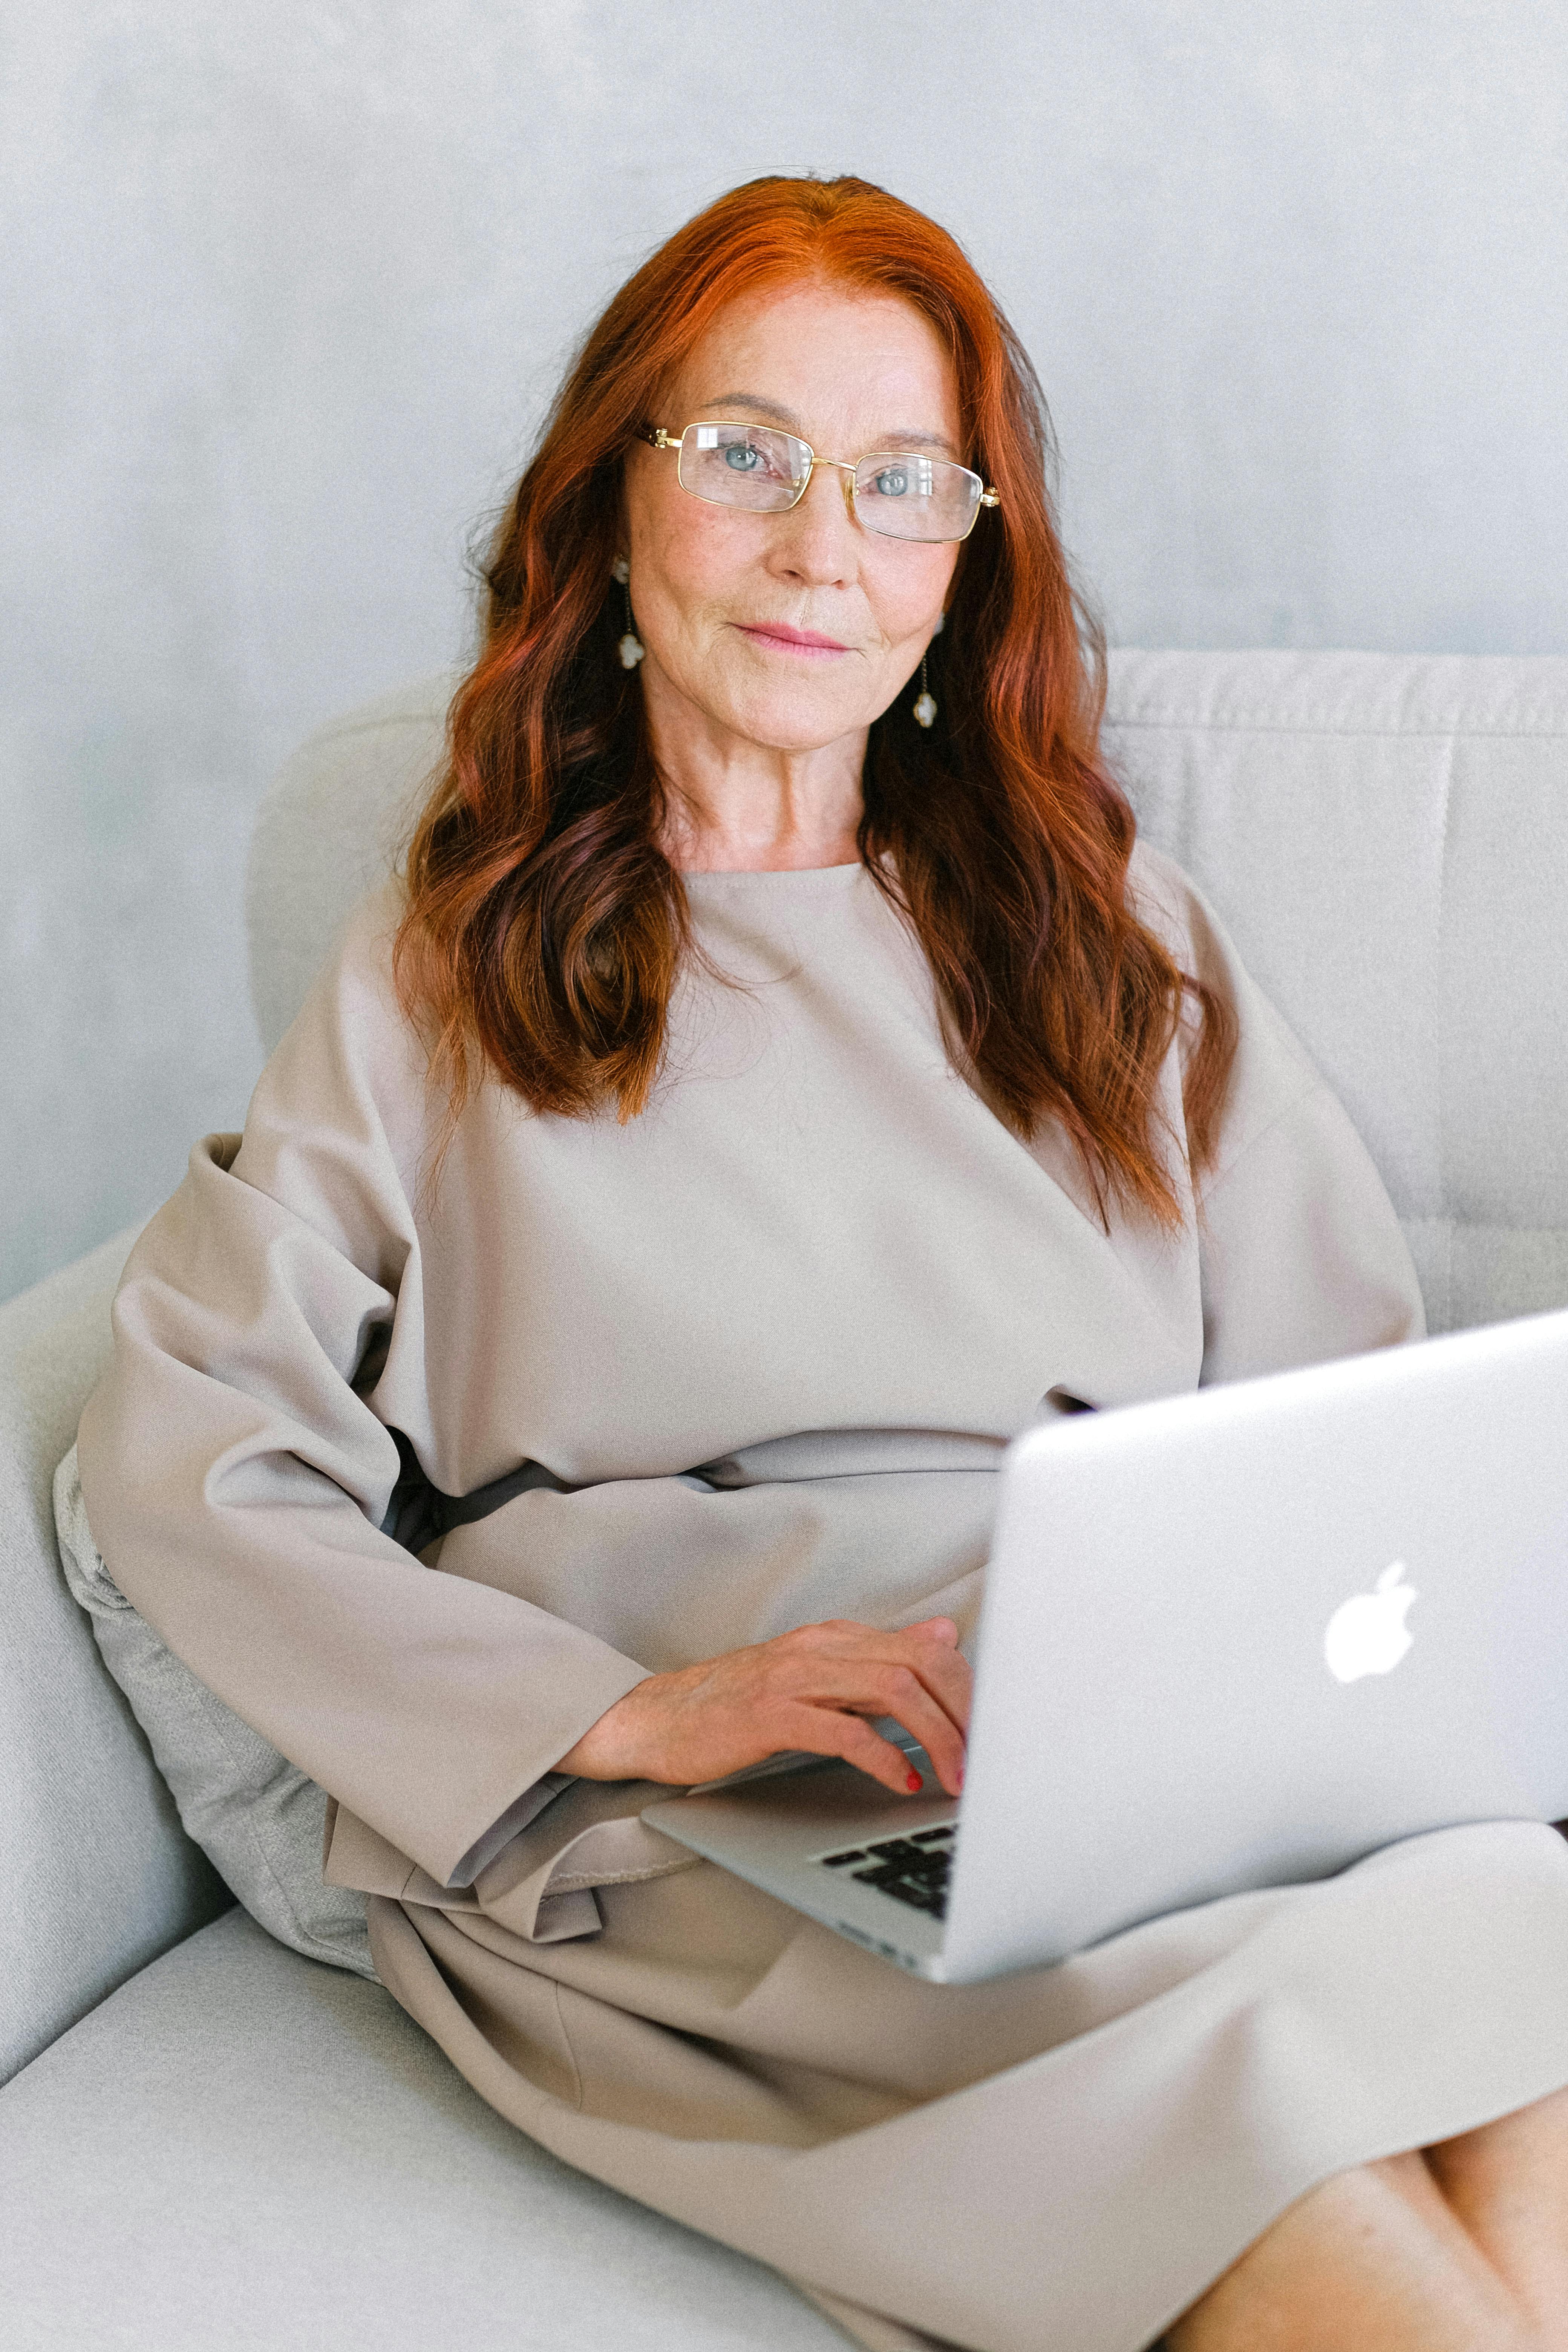 A woman sitting with a laptop | Source: Pexels